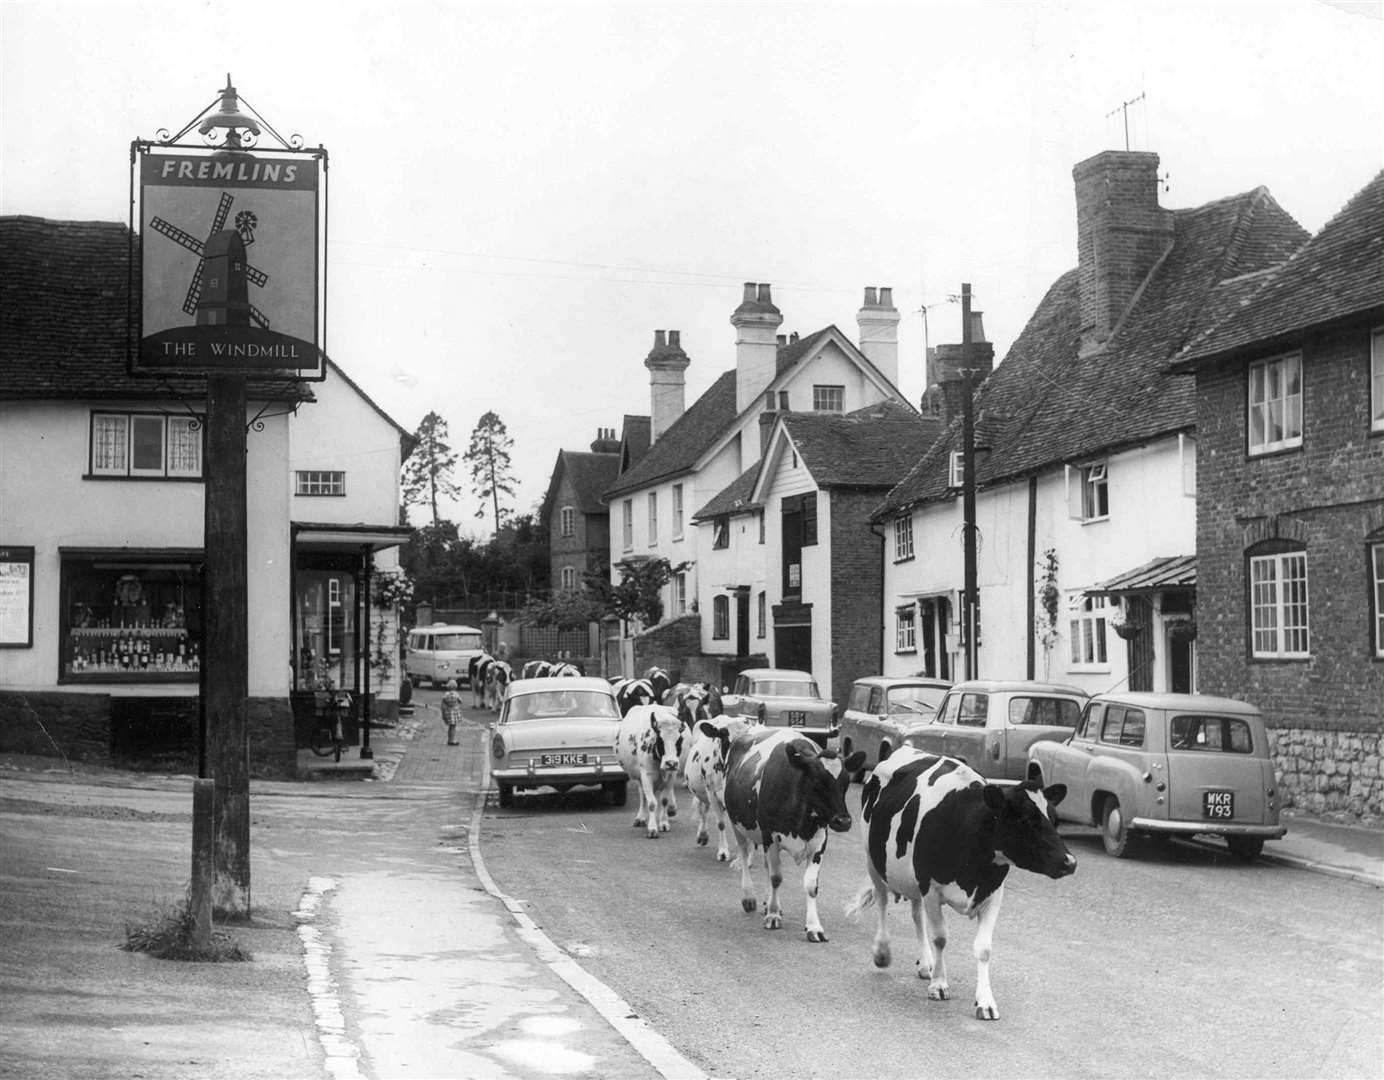 Cars had to give way to cattle at milking time in Hollingbourne in this 1950s scene